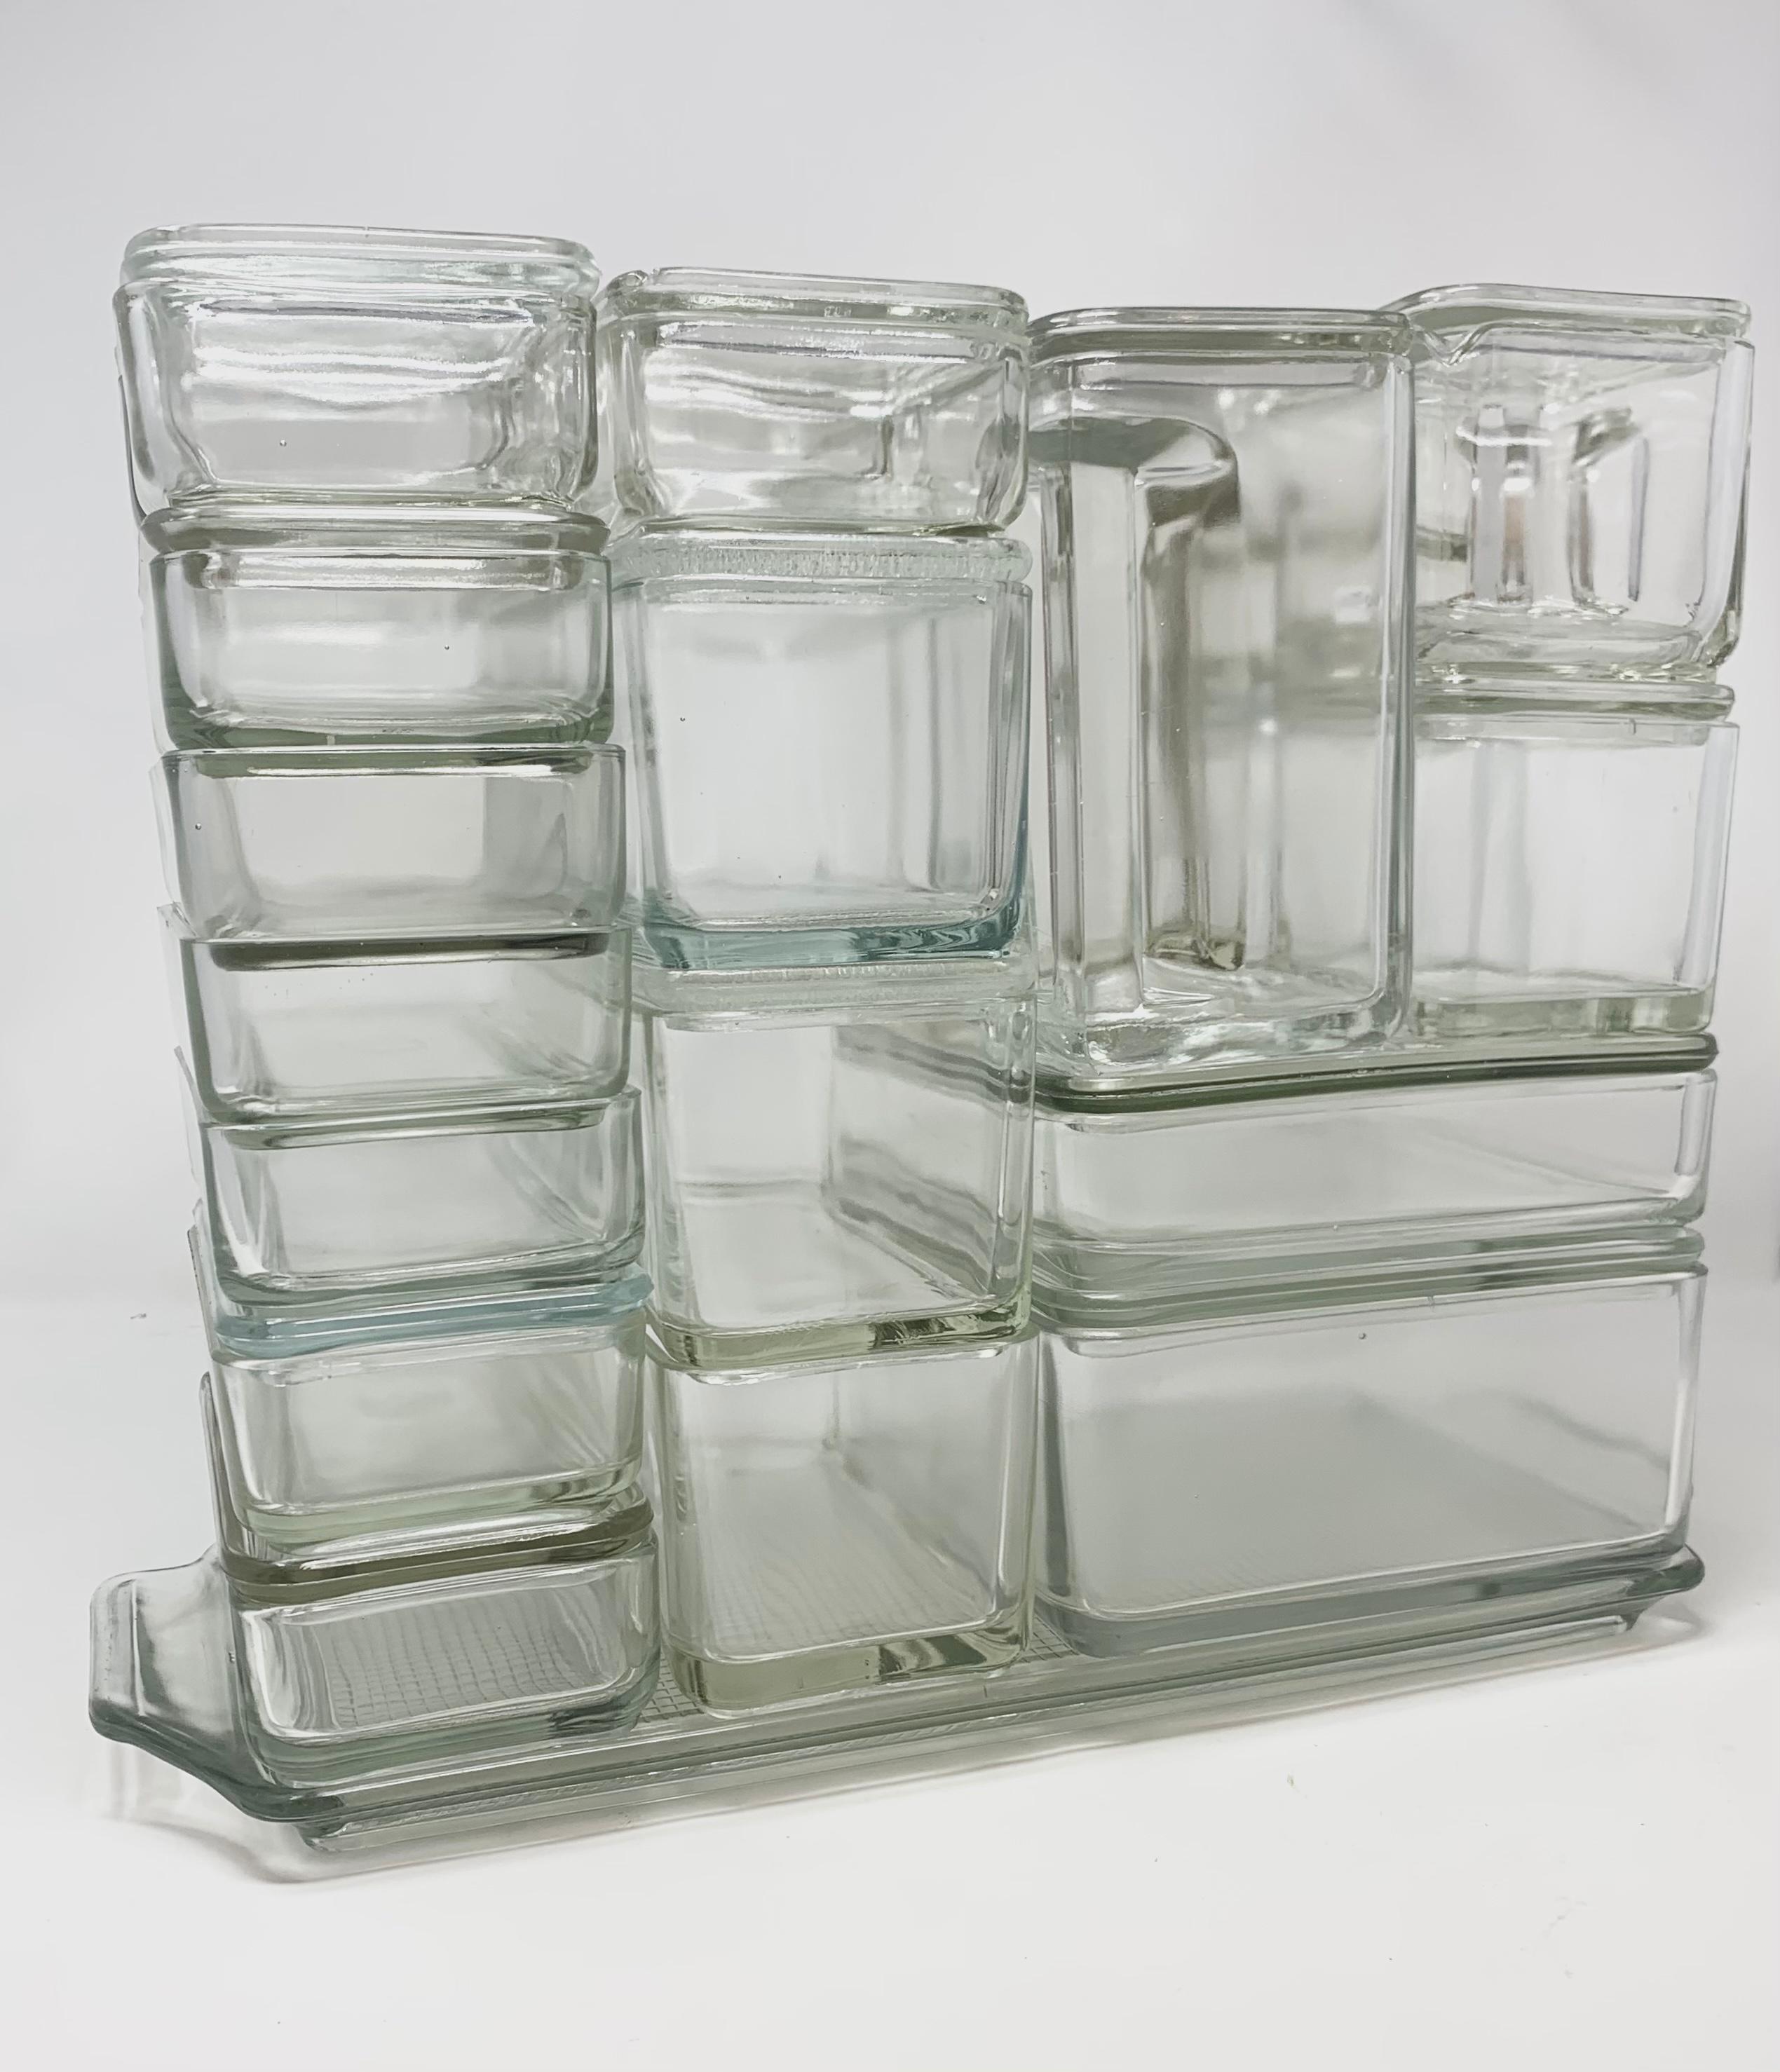 Set of Bahaus glass containers by Wilhelm Wagenfeld - Germany 1930s.